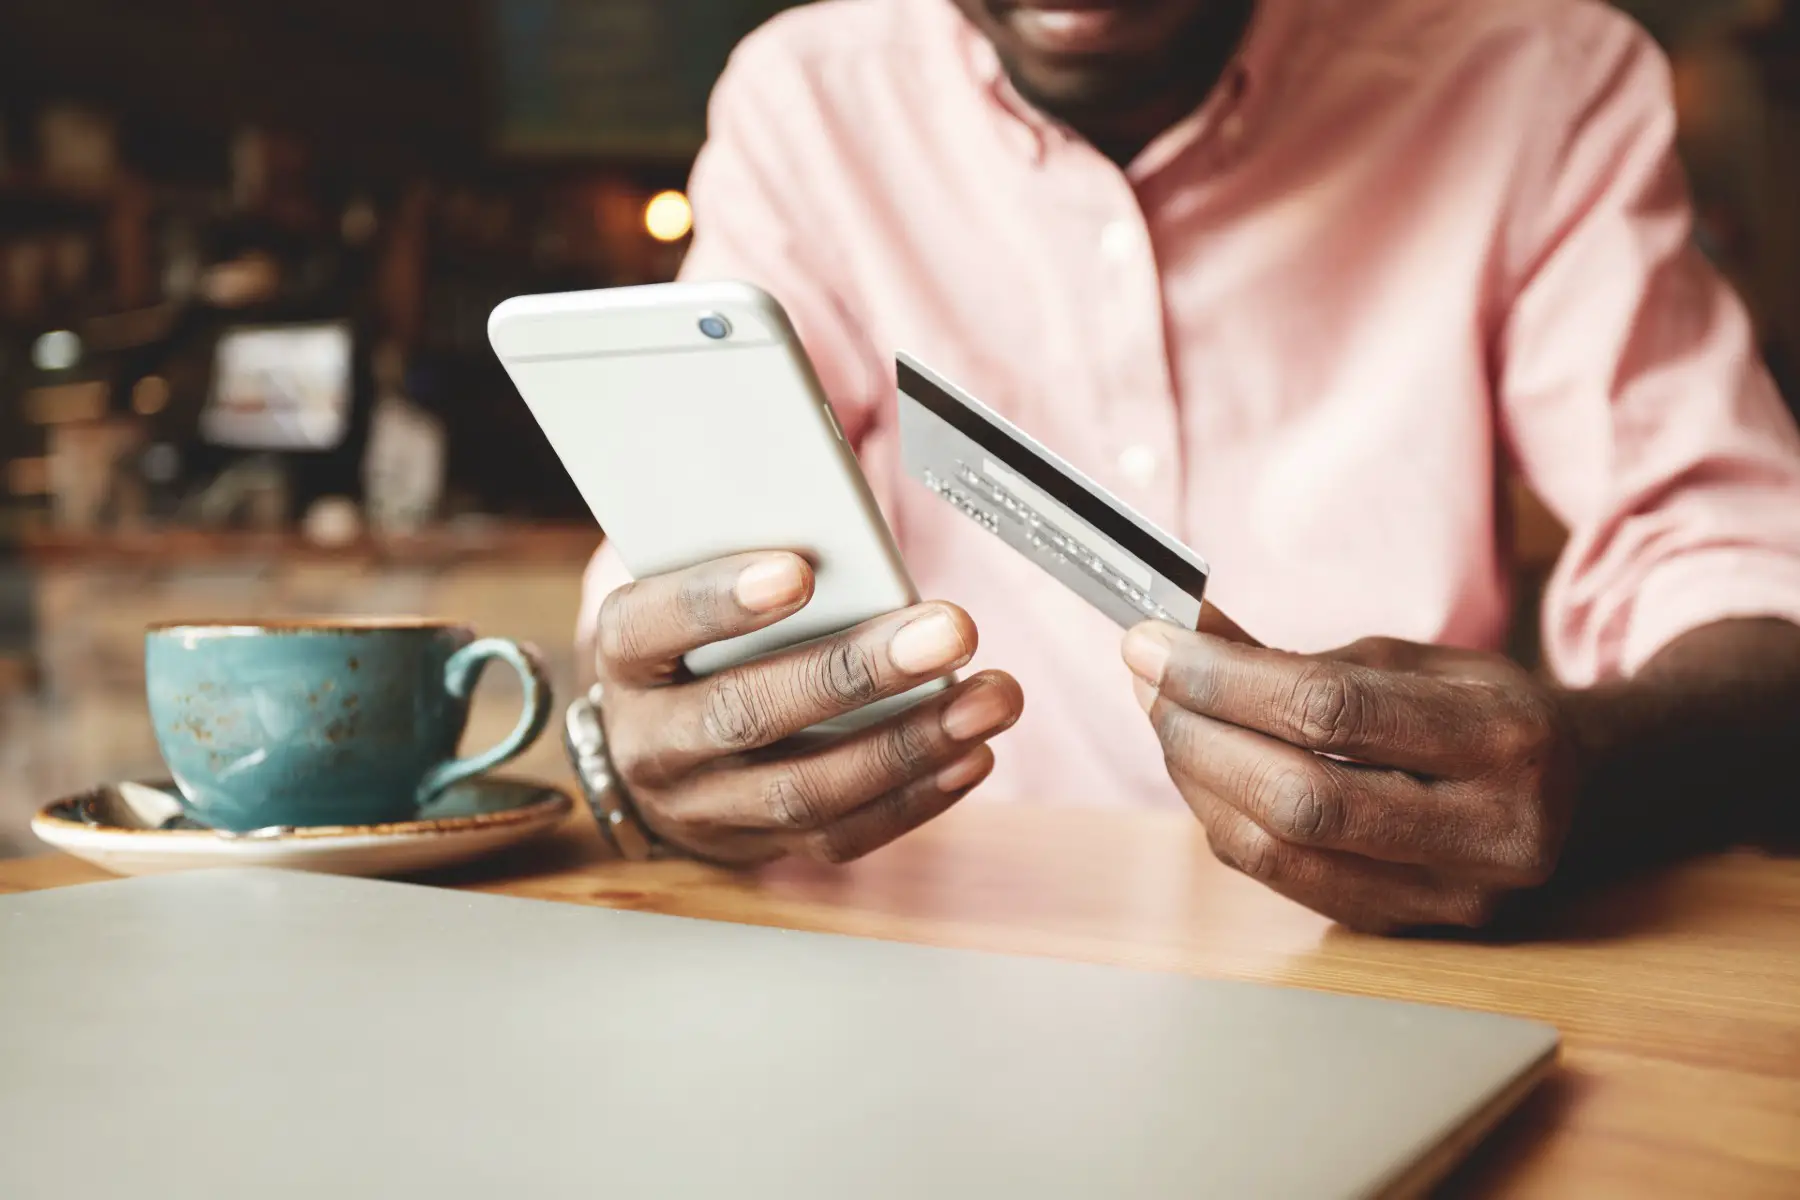 mobile money transfer uk: a man using his mobile and card to transact